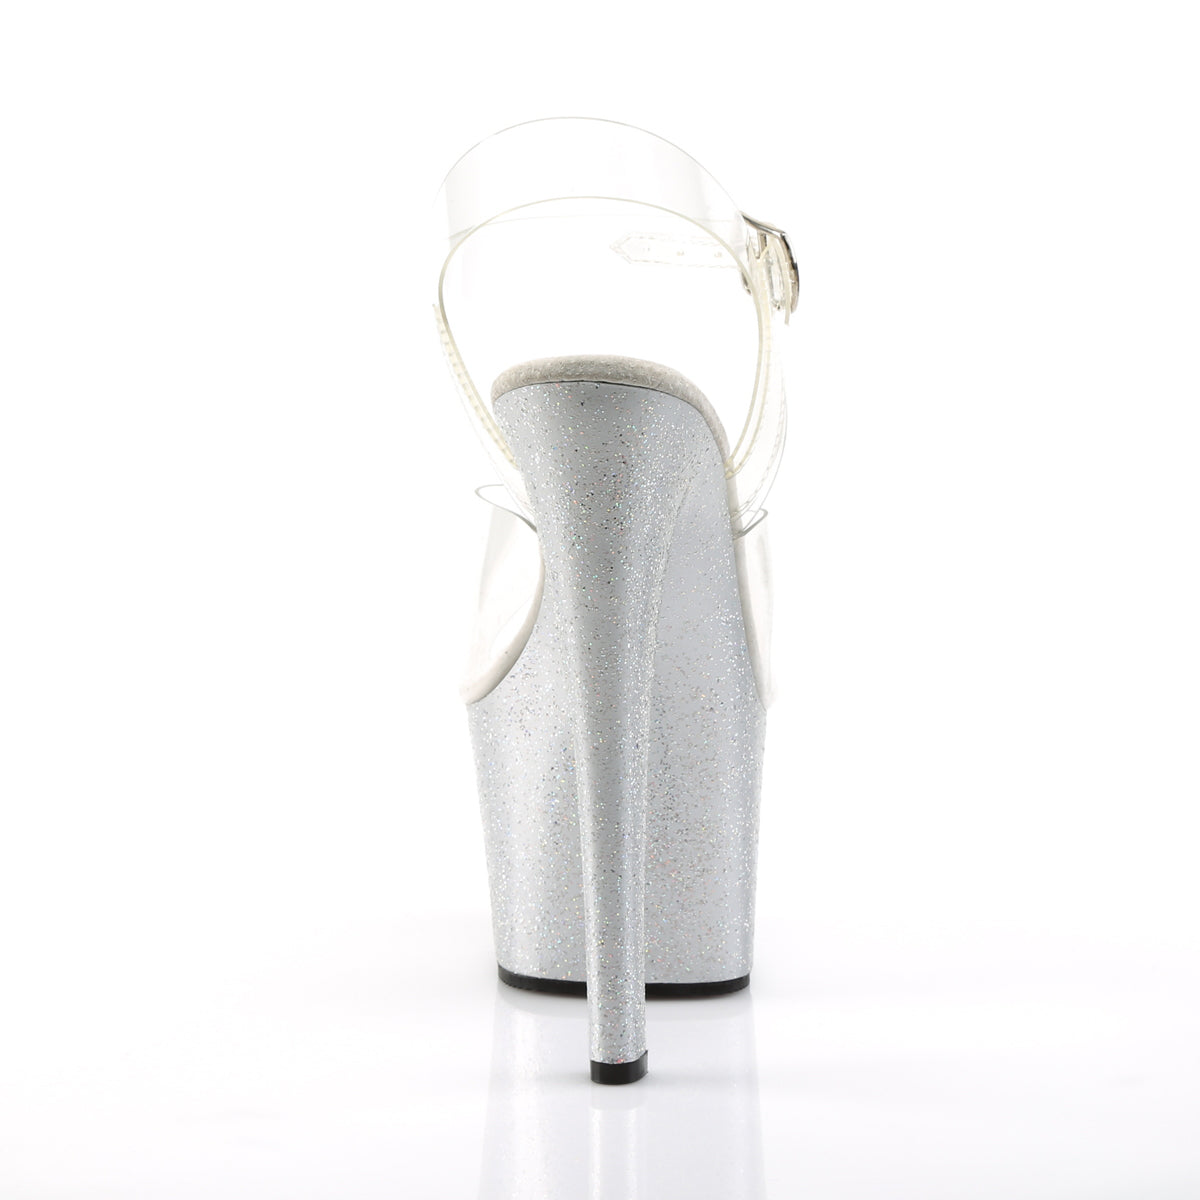 SKY-308MG Pleaser Clear/Silver Platform Shoes [Pole Dancing Shoes]